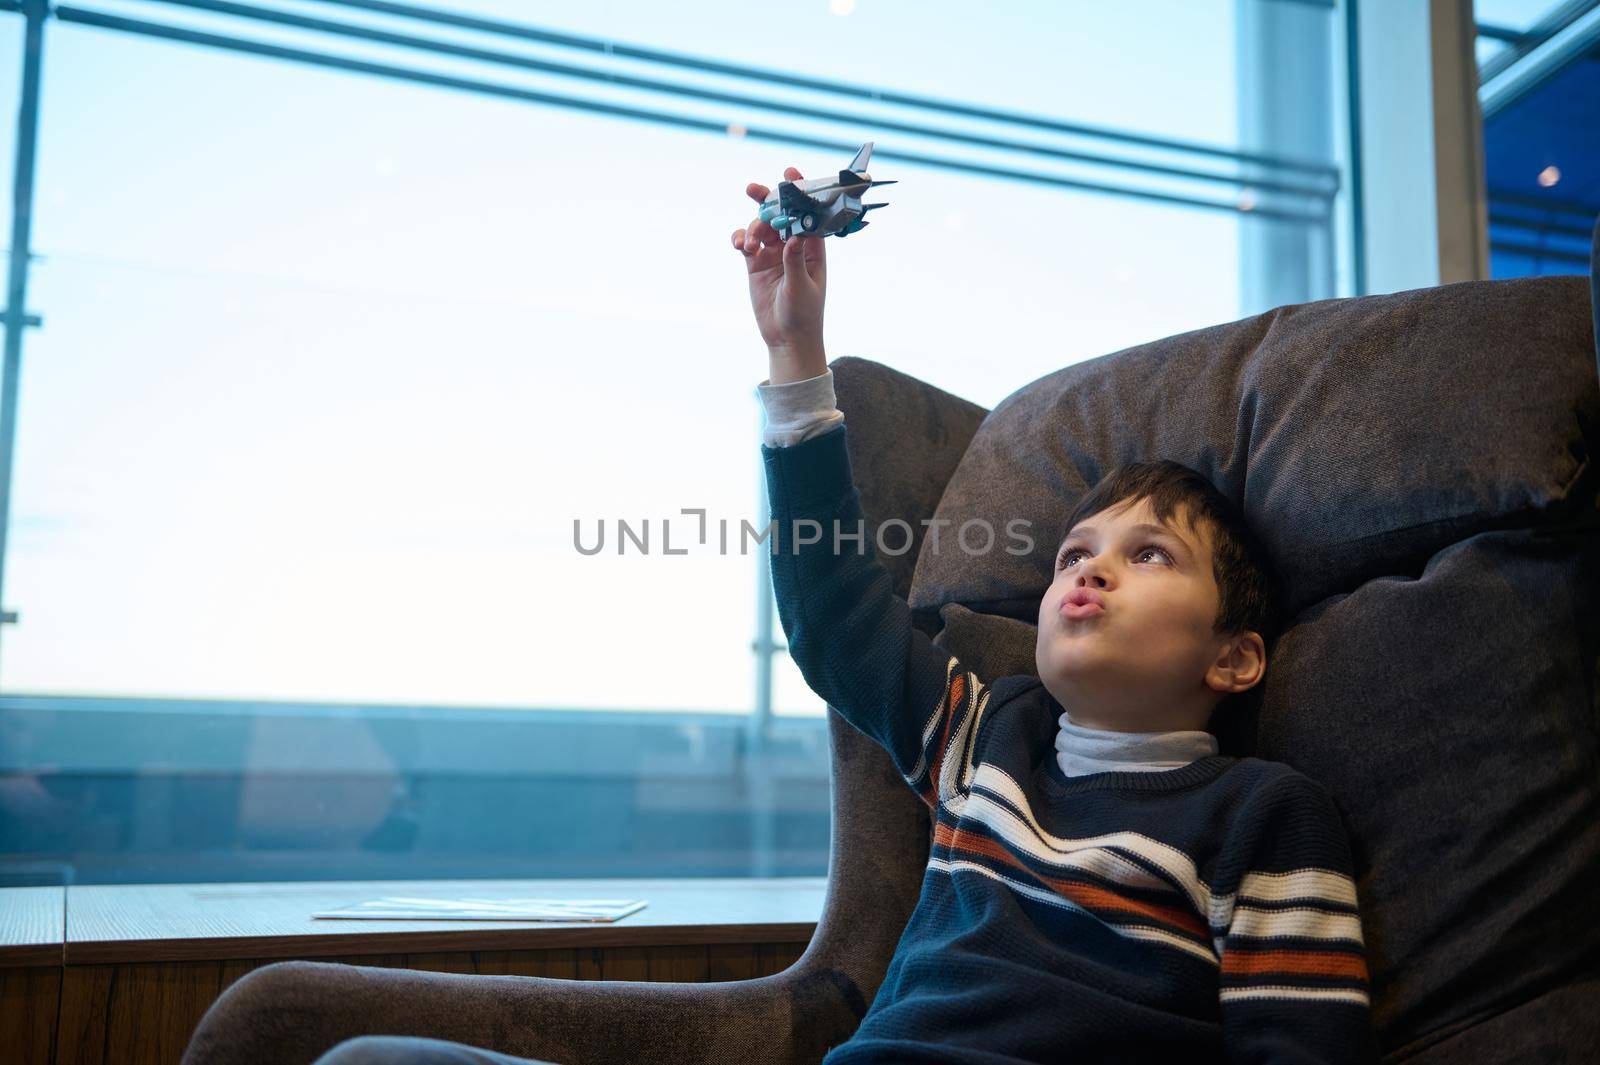 Adorable little boy plays toy plane in VIP lounge of the airport departure terminal sitting on armchair against panoramic windows overlooking runway by artgf